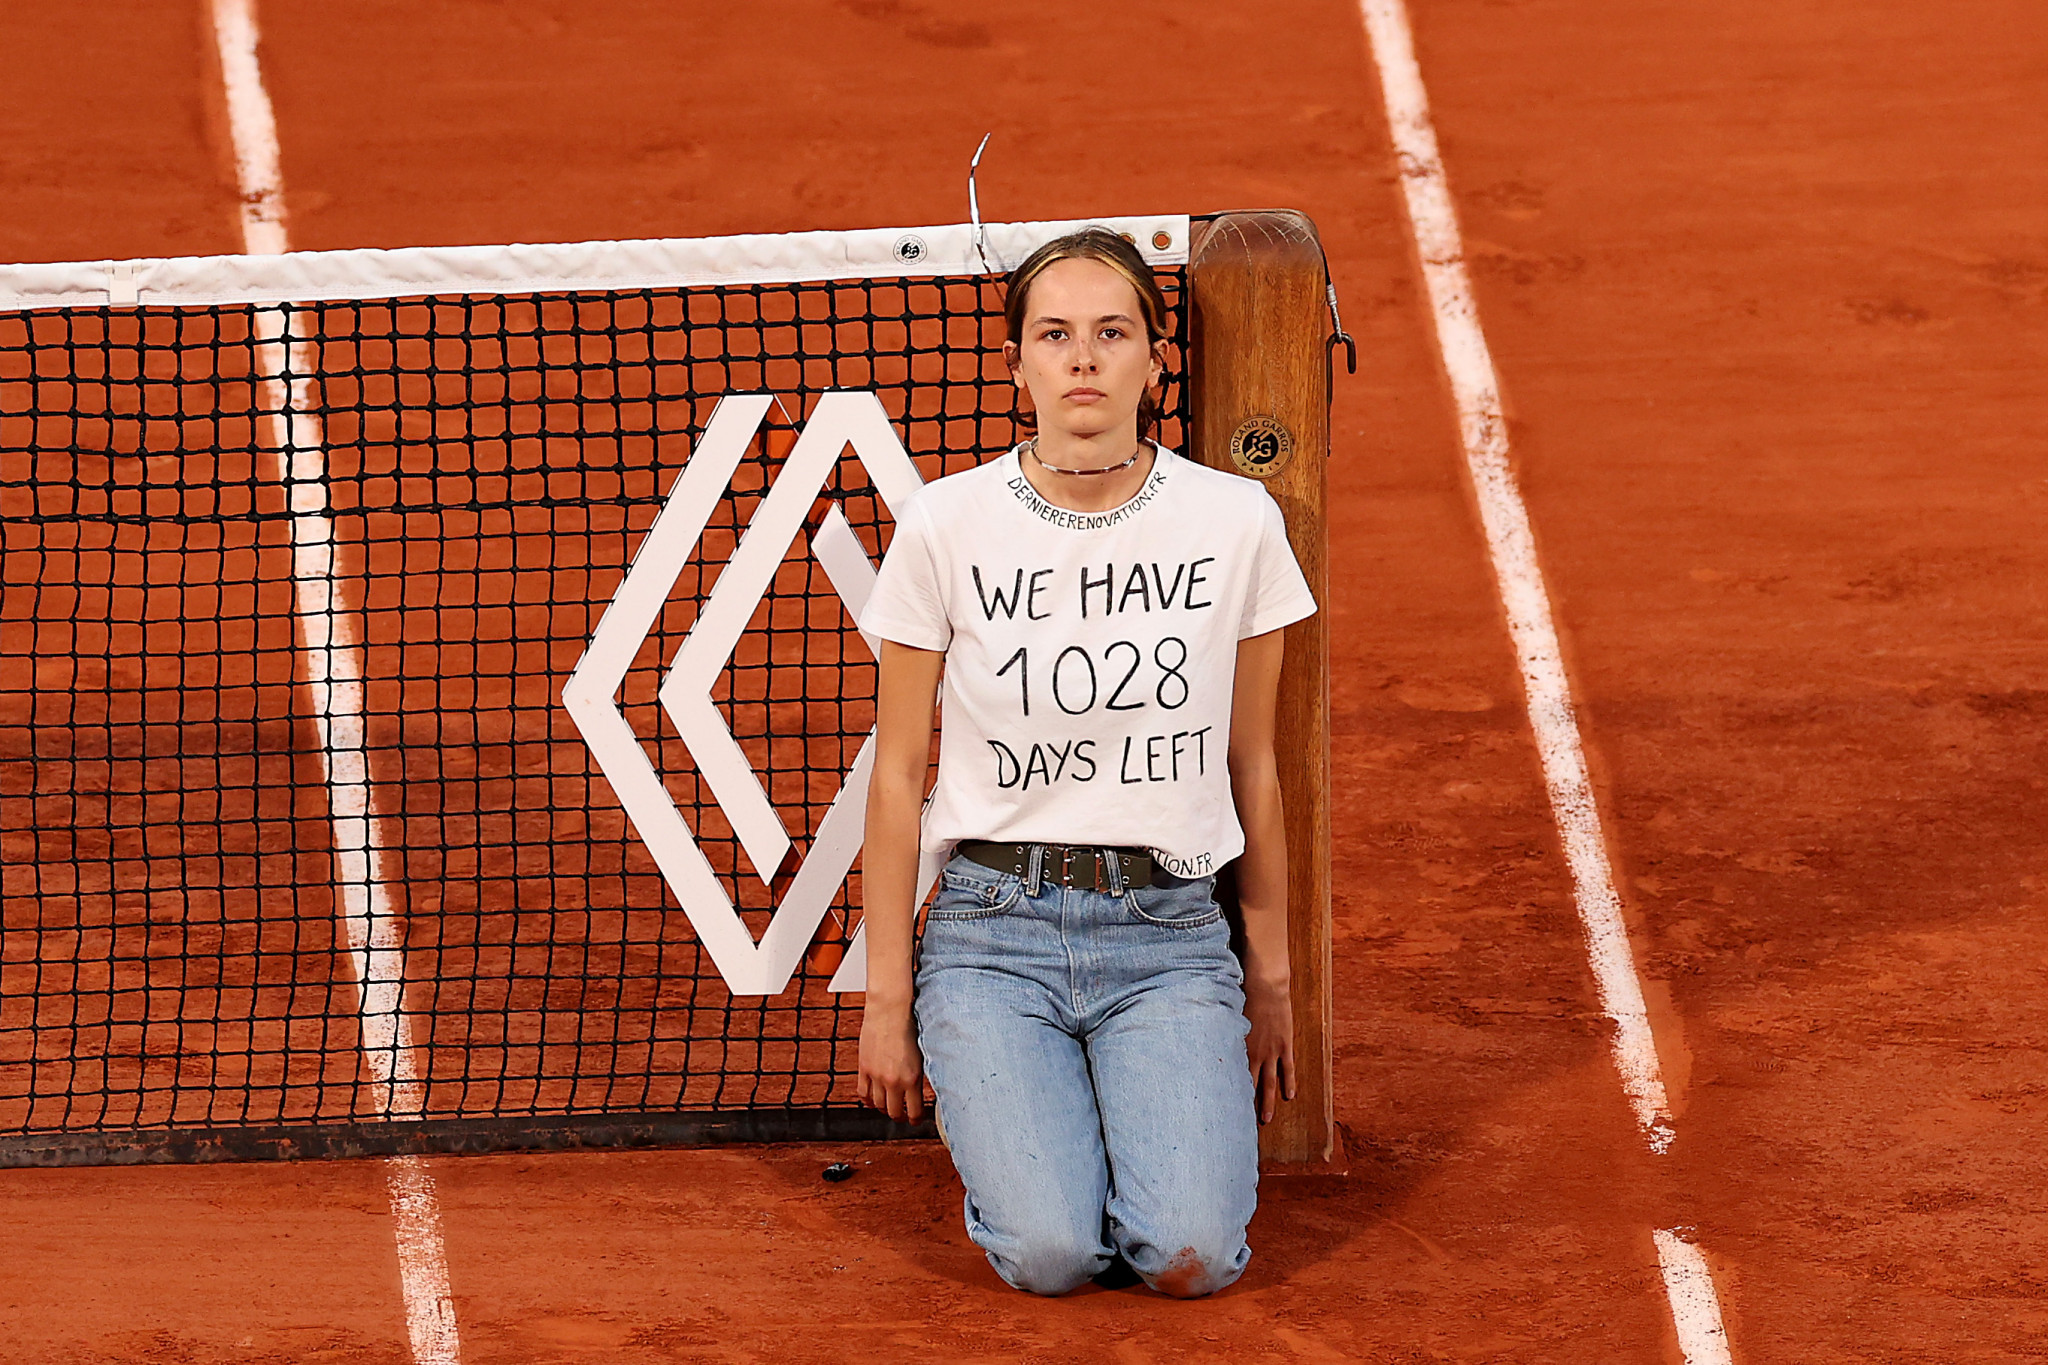 A climate activist tied herself to the net during the semi-finals between Casper Ruud and Marin Čilić ©Getty Images